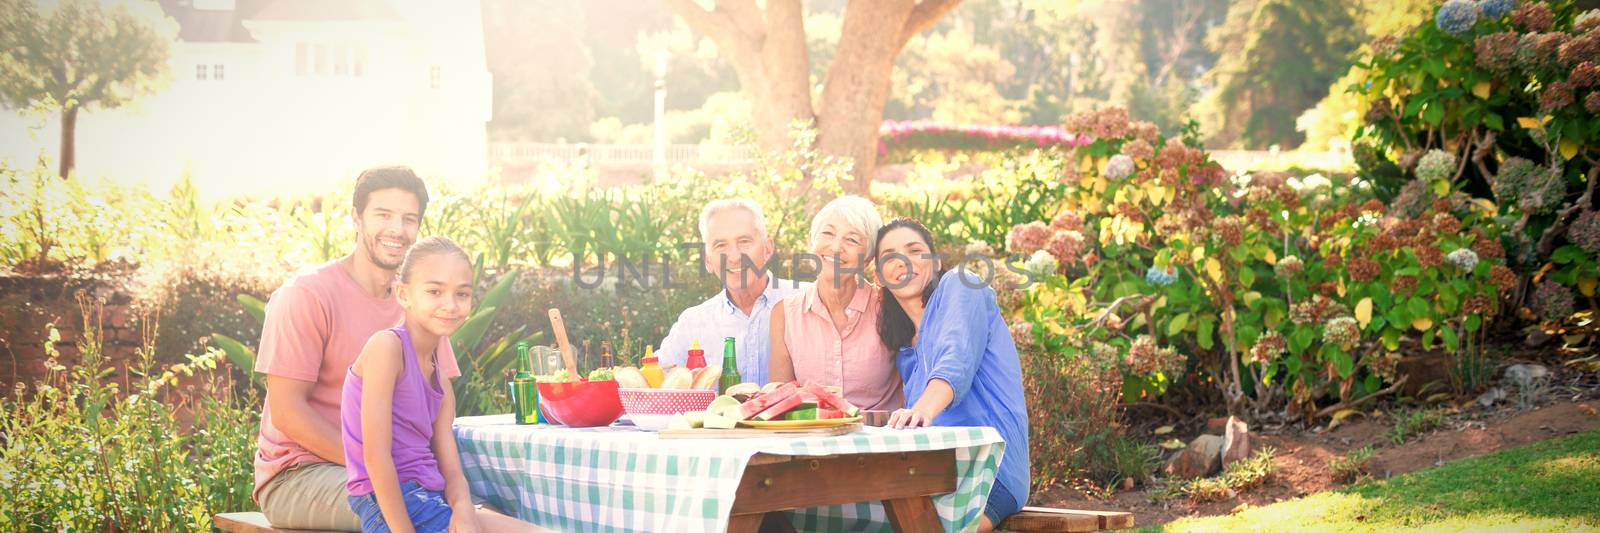 Portrait of happy family having barbecue in the park